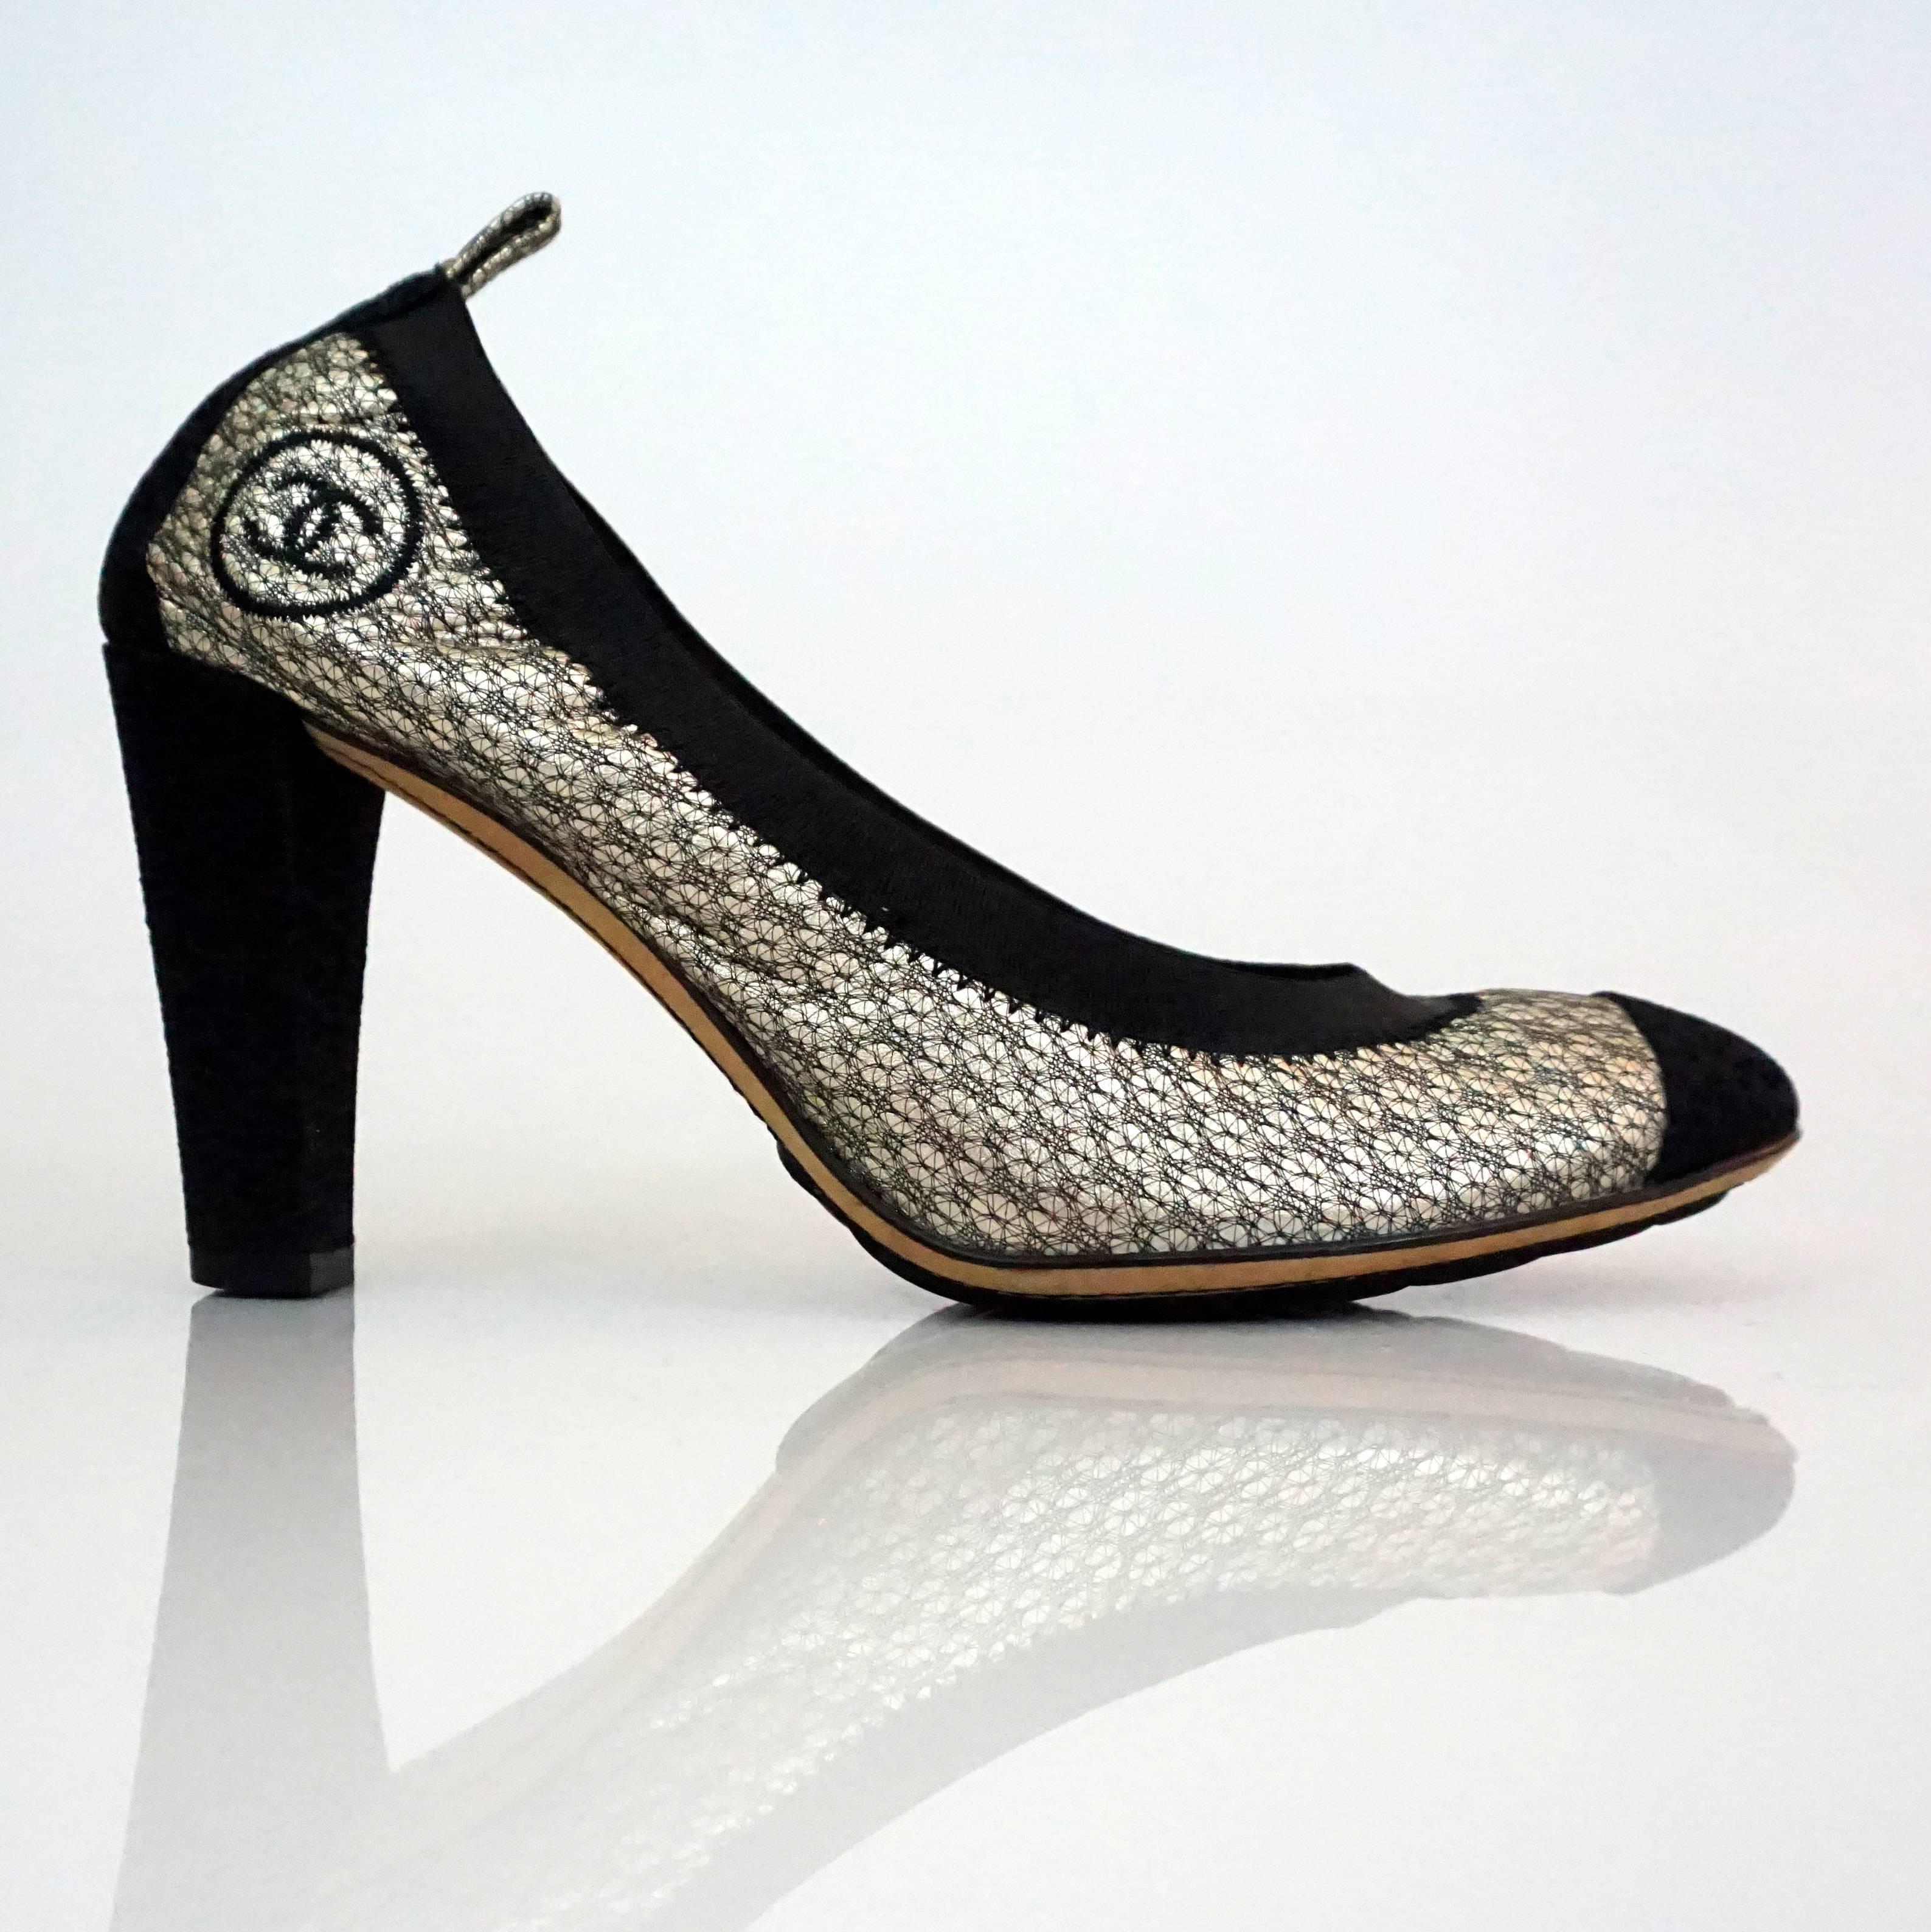 Chanel Metallic Leather and Black Brocade Stretch Pump - 36.5 This fabulous Gold/Bronze leather metallic pump with black threading throughout the leather, has a black stitched CC logo, black toe and heel are of black brocade fabric. It is a stretch